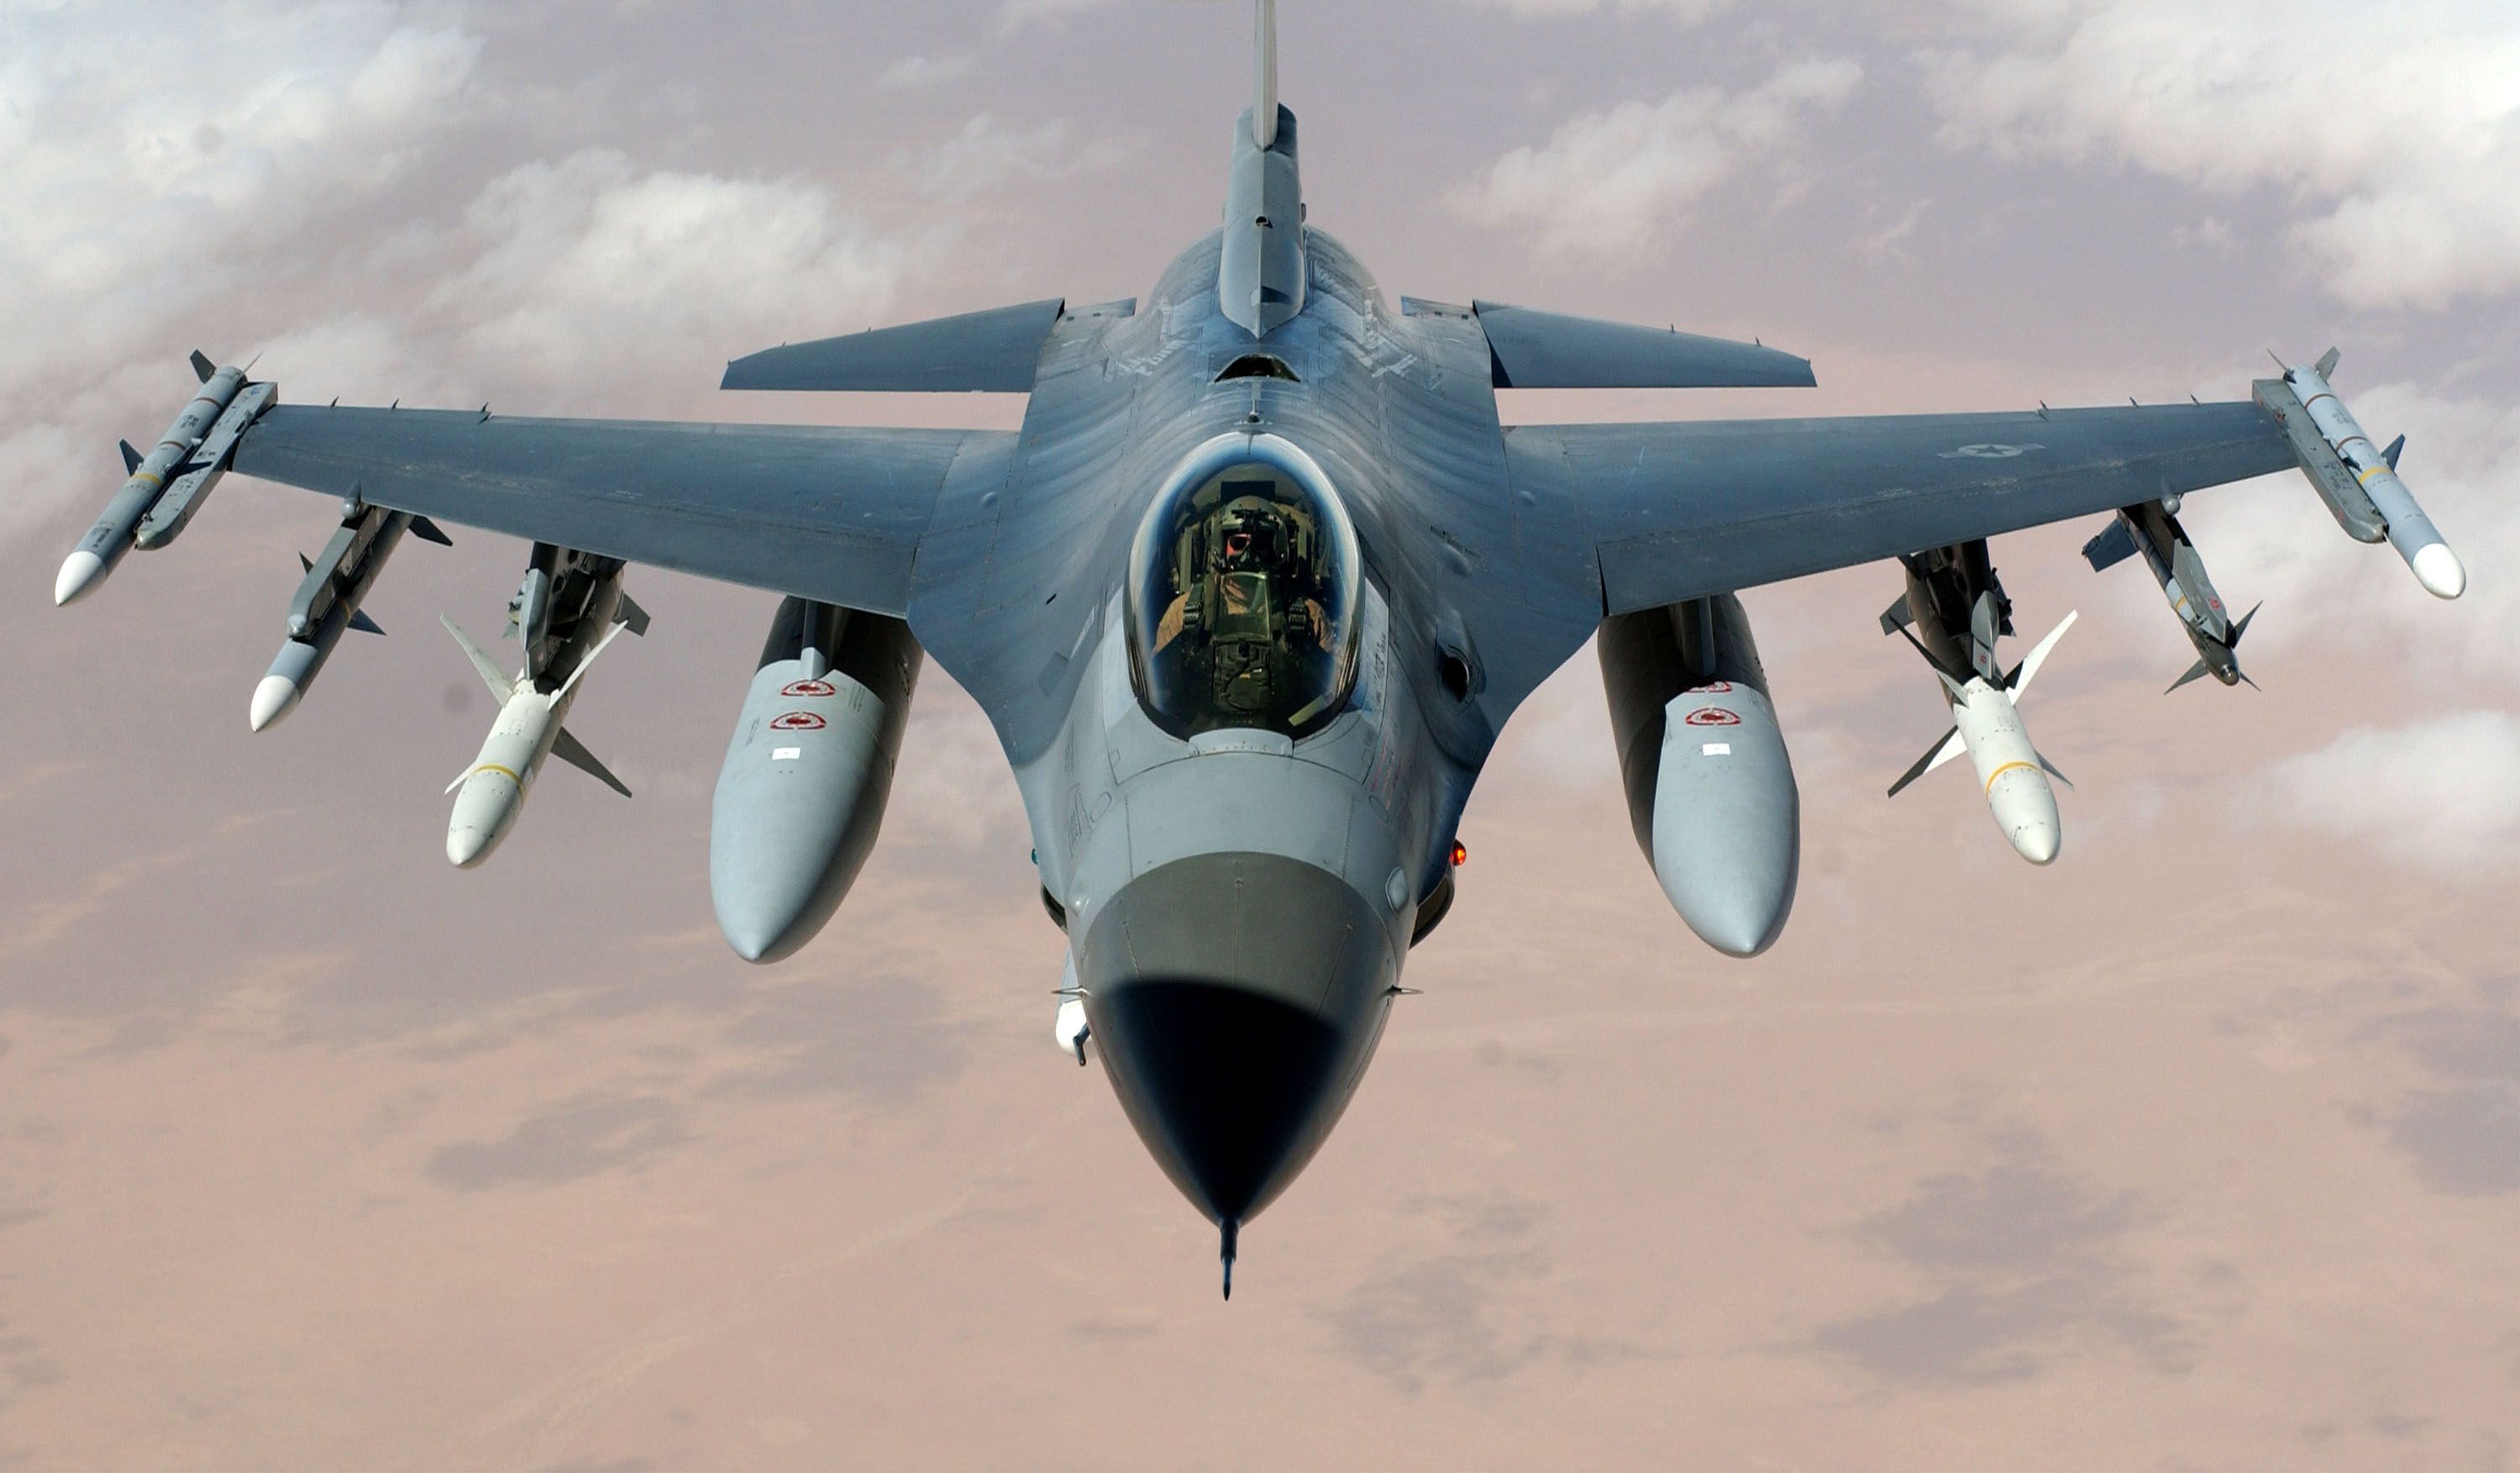 United States Air Force F-16 Fighting Falcon over Iraq New Photo 6 Sizes! 